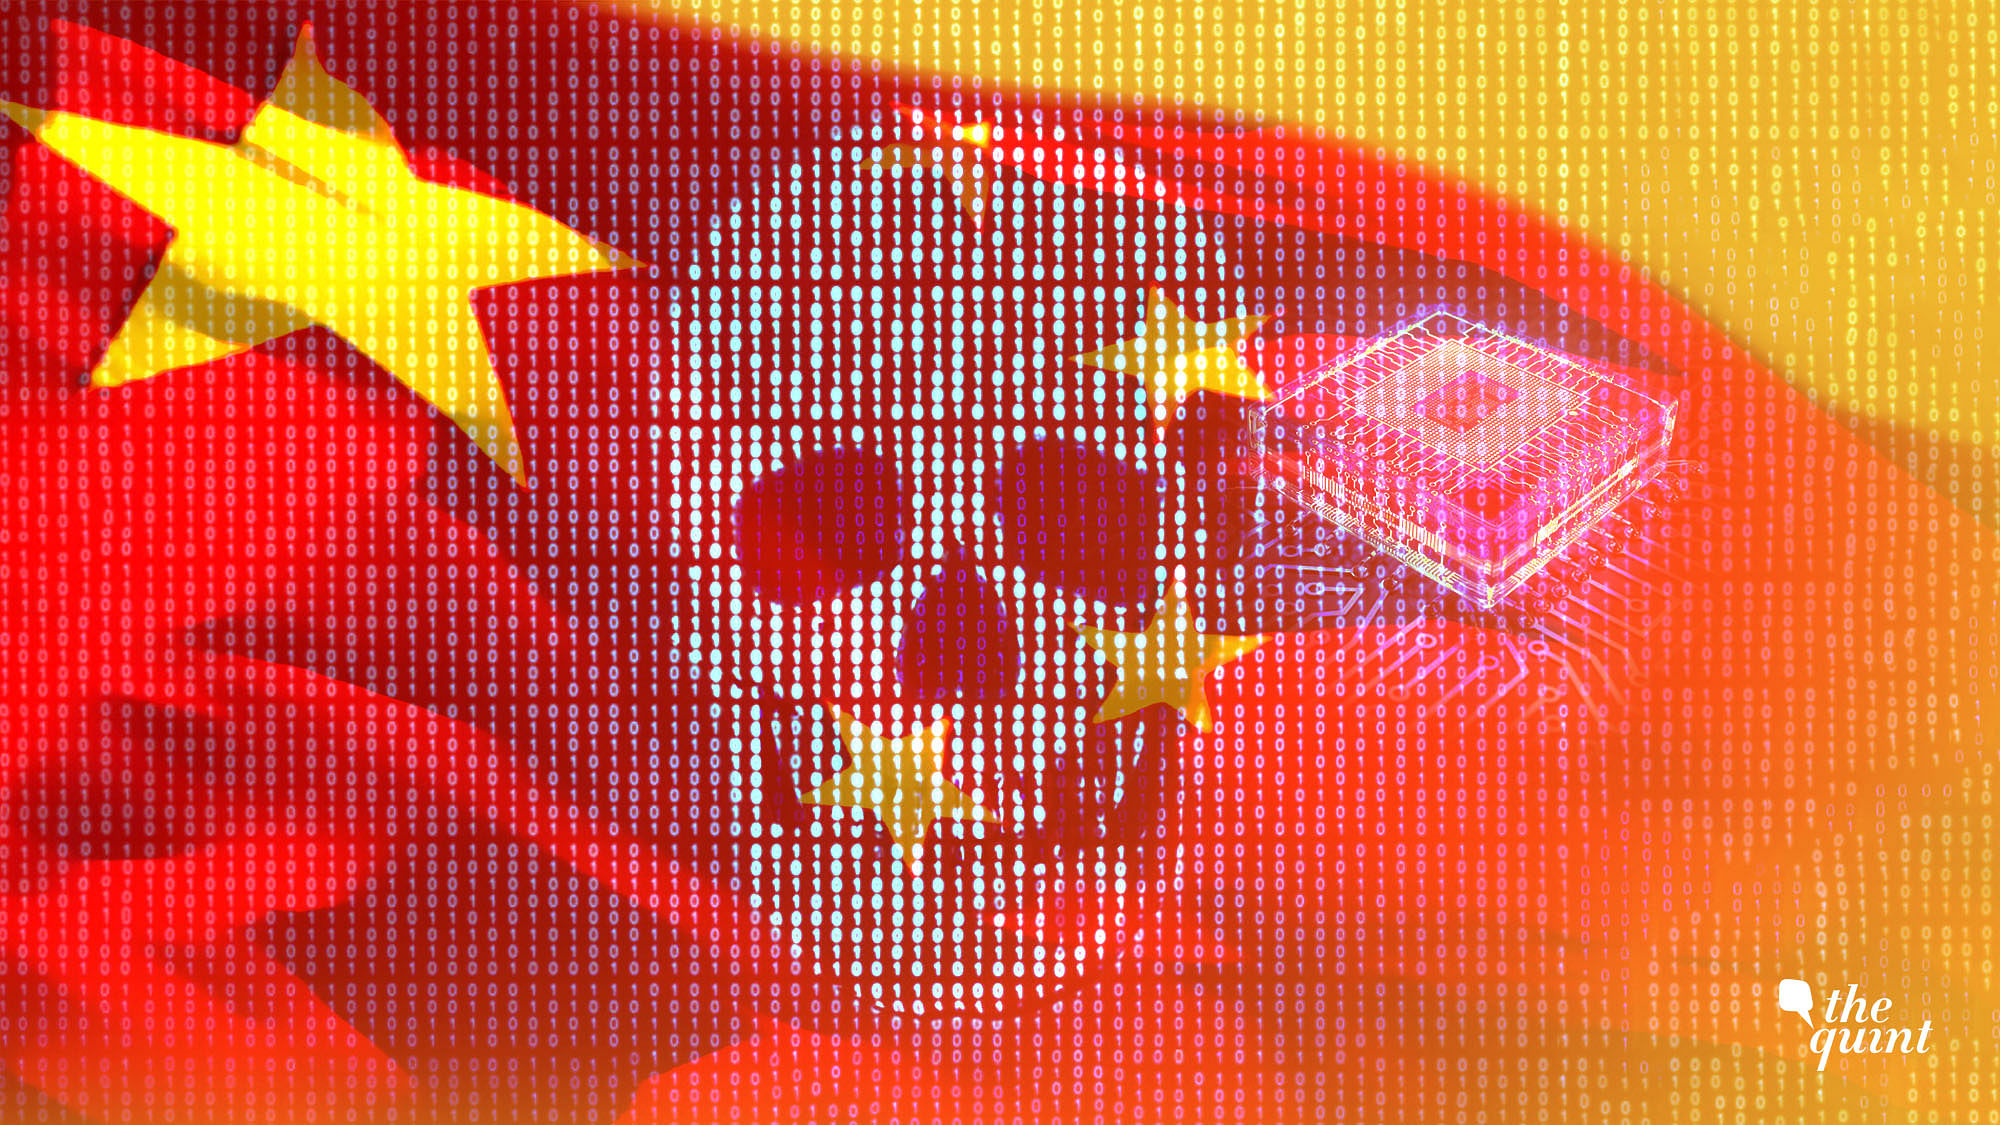 Chinese spies have infiltrated more than 30 tech companies in the US using a microchip.&nbsp;